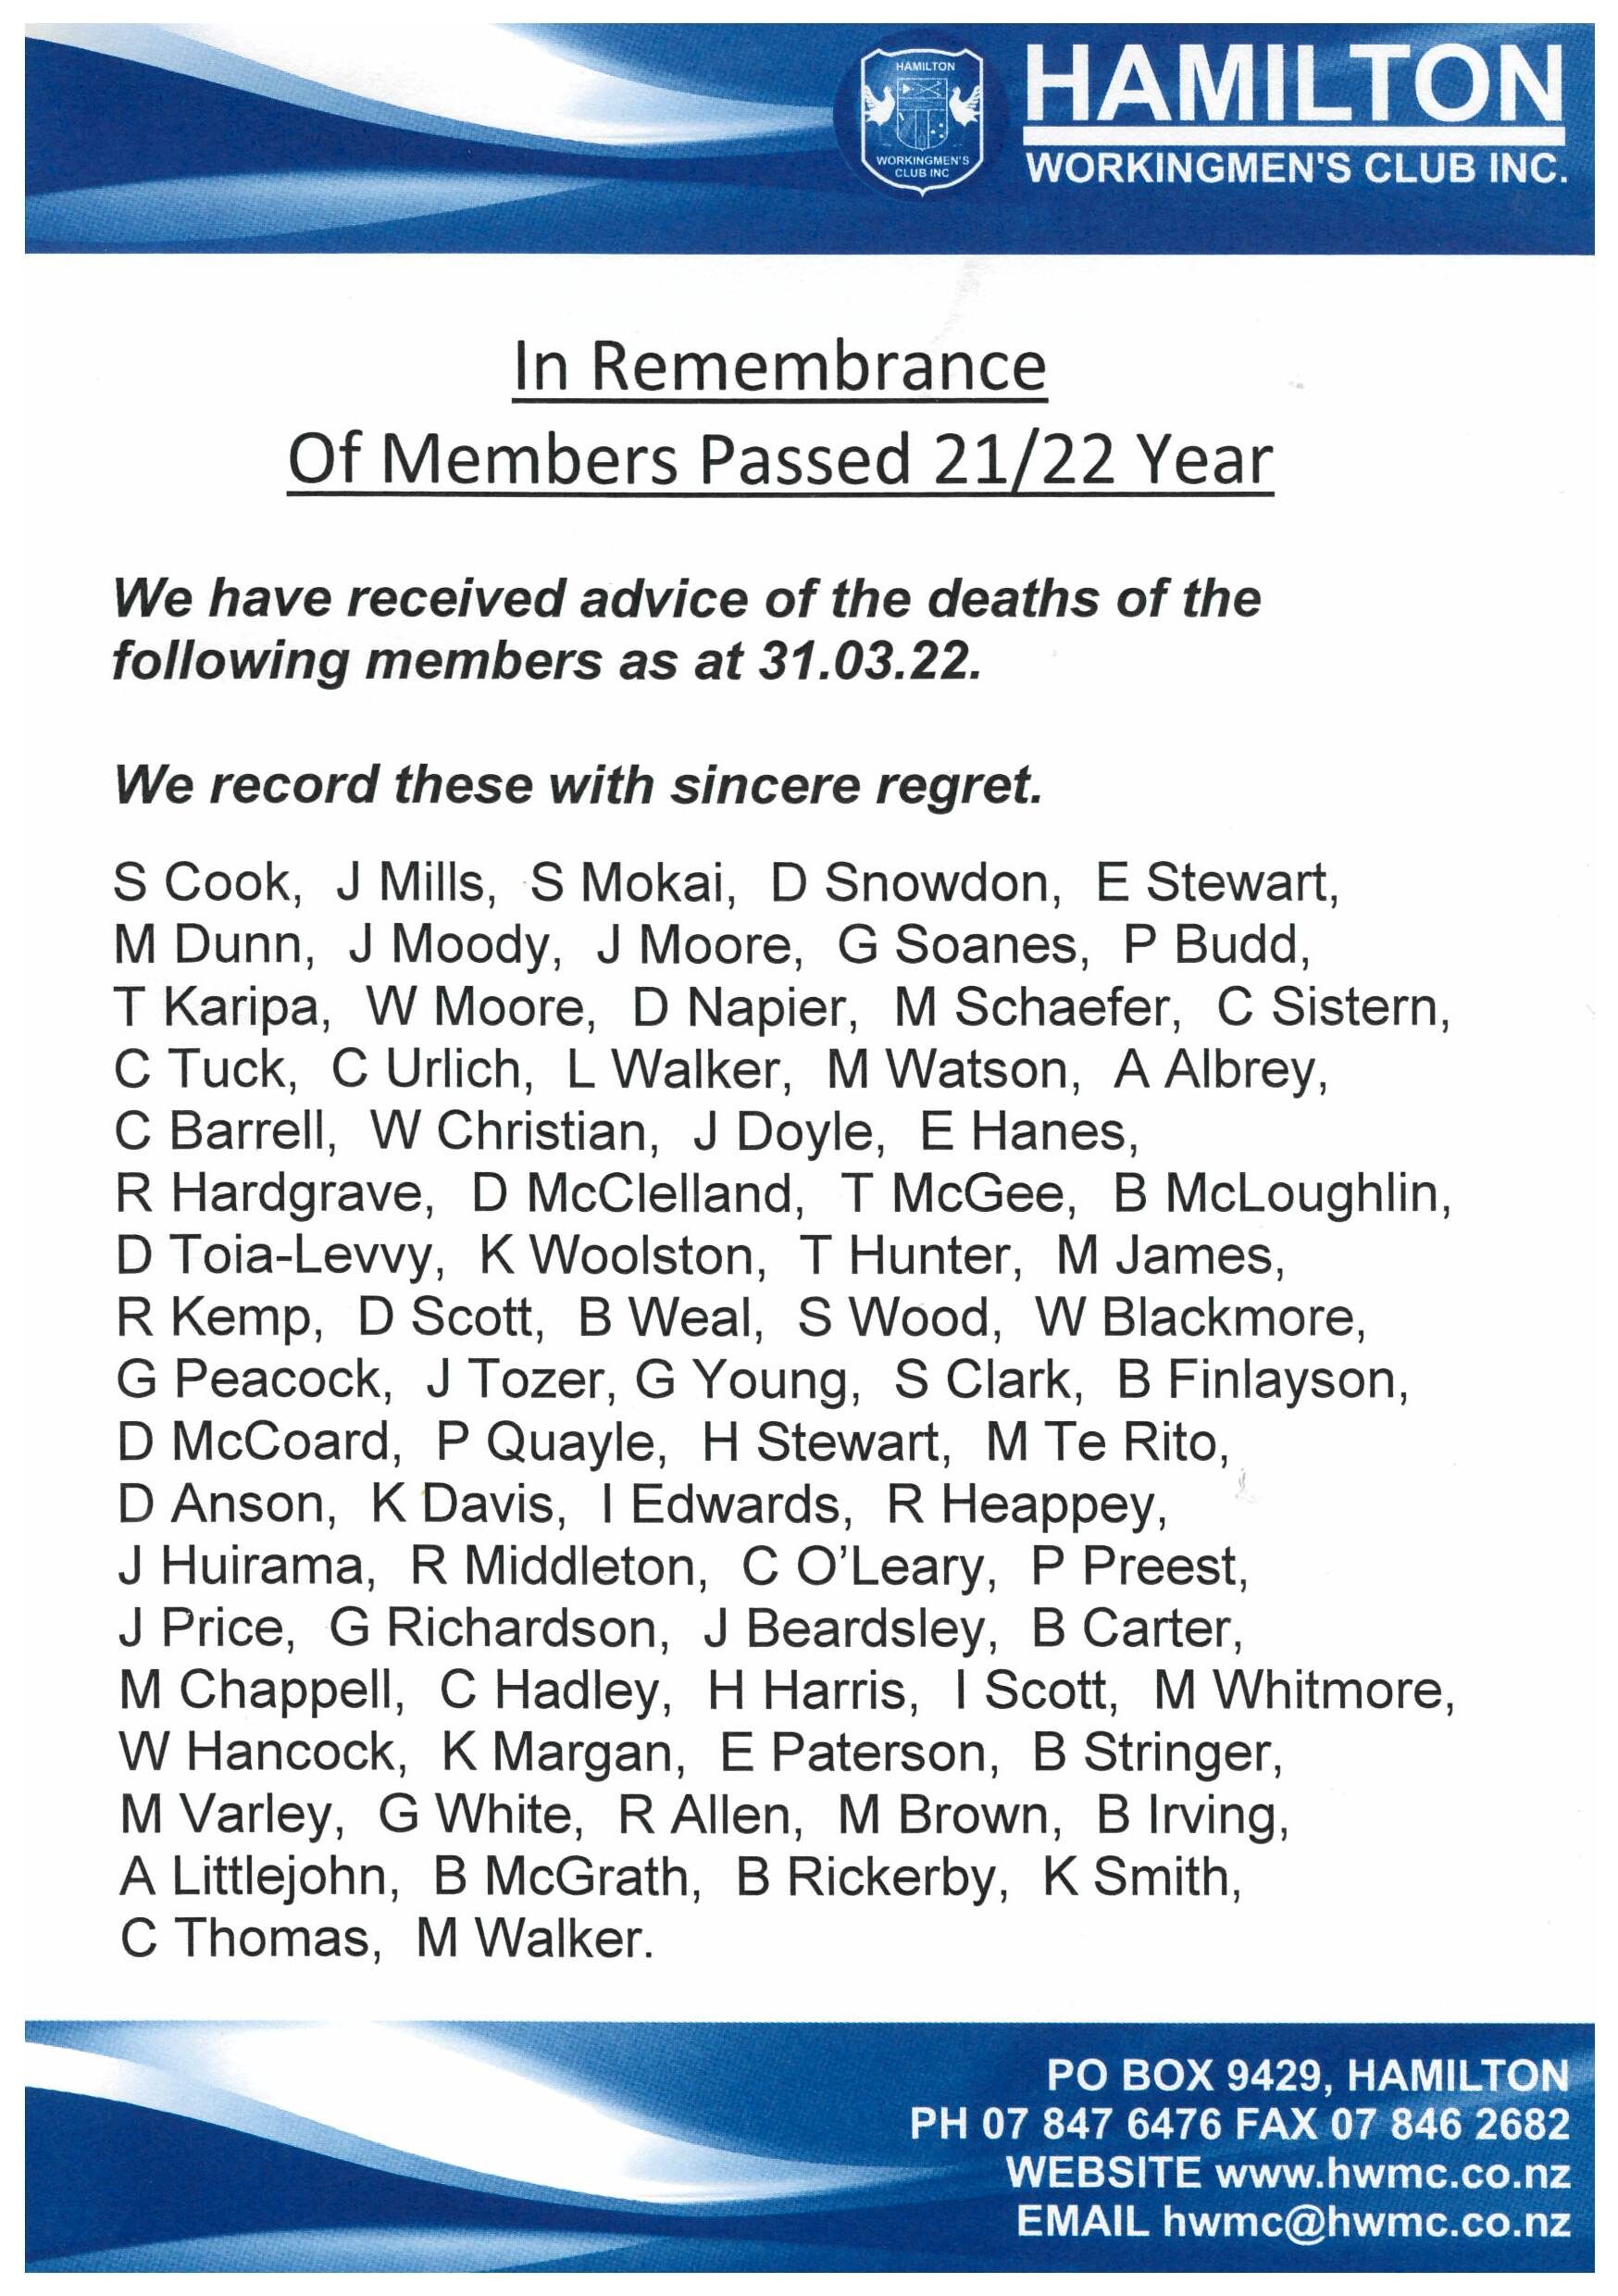 In Remembrance of Members Passed 21 - 22 Year